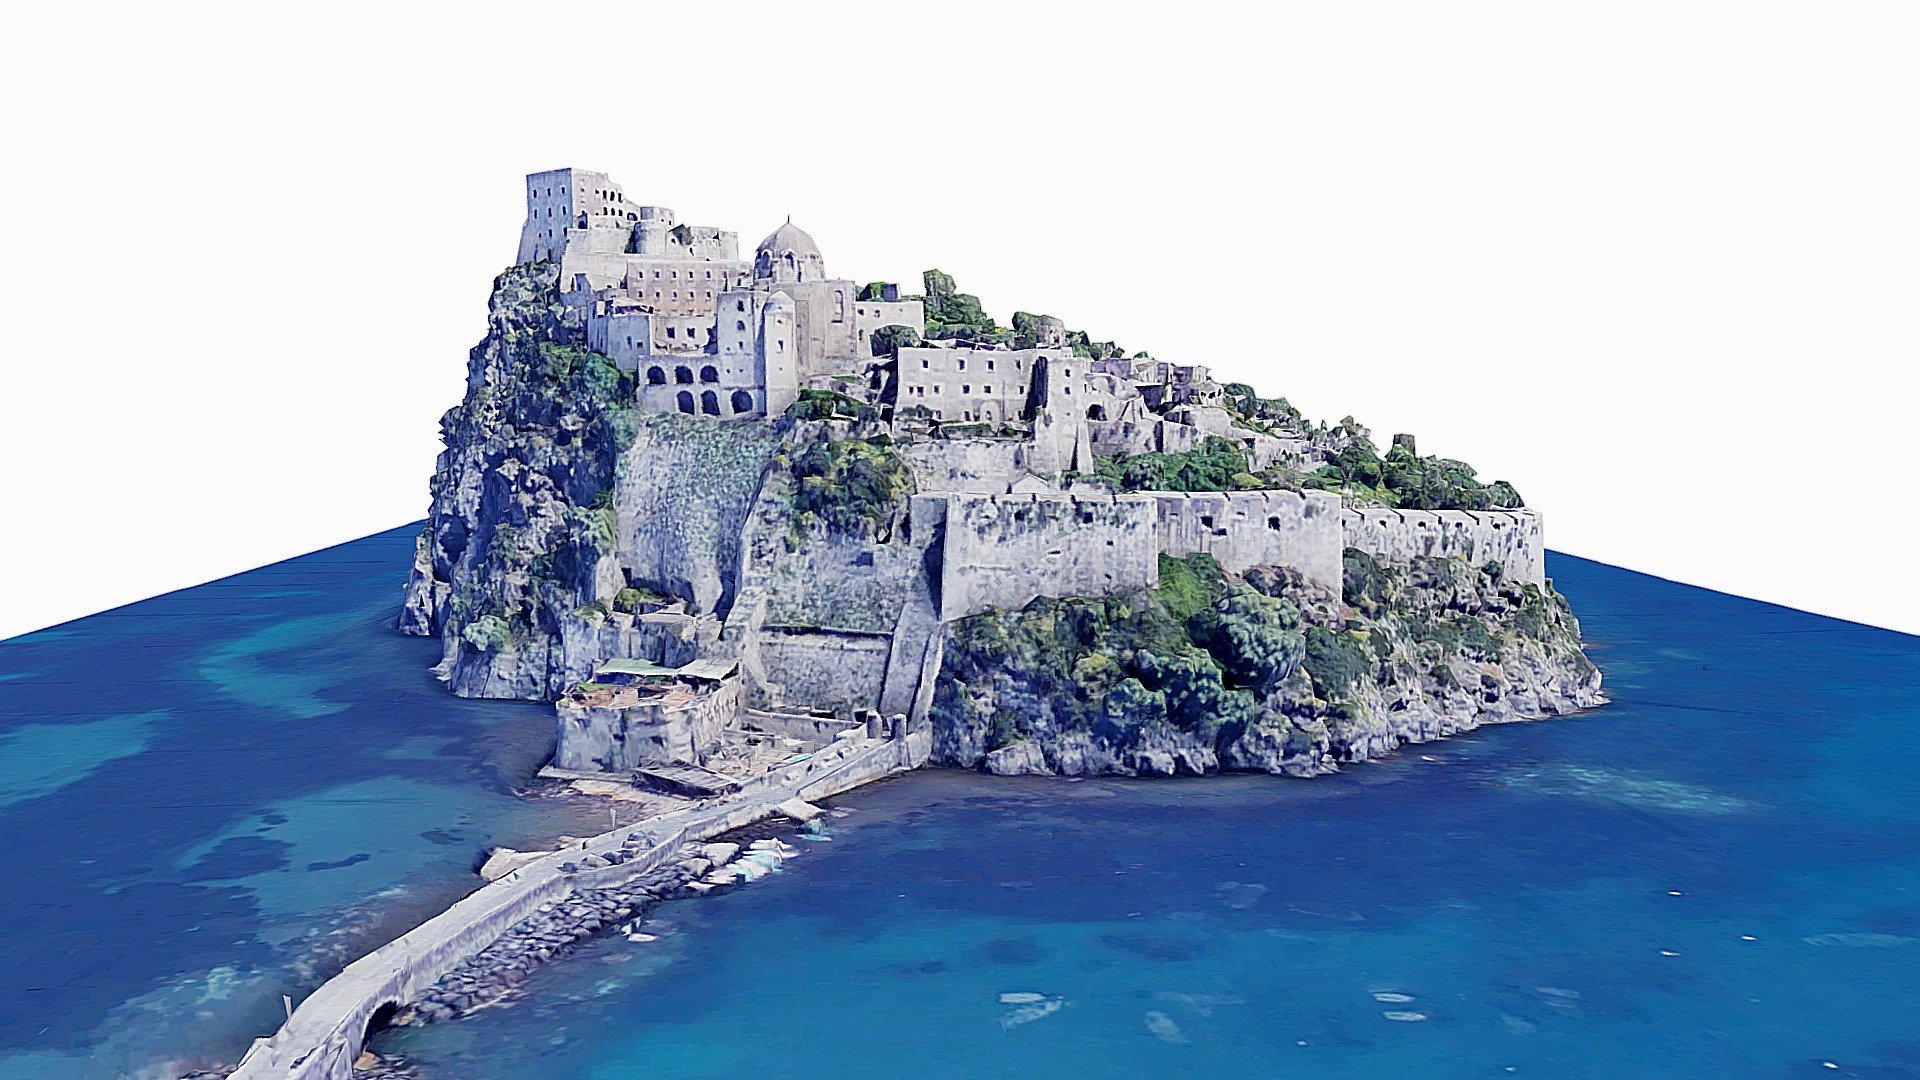 If someone is interested in the model, you can contact me through the following email potorro44@hotmail.com

Aragonese Castle (Italian: Castello Aragonese) is a medieval castle next to Ischia (one of the Phlegraean Islands), at the northern end of the Gulf of Naples, Italy.[1] The castle stands on a volcanic rocky islet that connects to the larger island of Ischia by a causeway (Ponte Aragonese).

The castle was built by Hiero I of Syracuse in 474 BC. At the same time, two towers were built to control enemy fleets’ movements. The rock was then occupied by Parthenopeans (the ancient inhabitants of Naples). In 326 BC the fortress was captured by Romans, and then again by the Parthenopeans. In 1441 Alfonso V of Aragon connected the rock to the island with a stone bridge instead of the prior wood bridge, and fortified the walls in order to defend the inhabitants against the raids of pirates 3d model